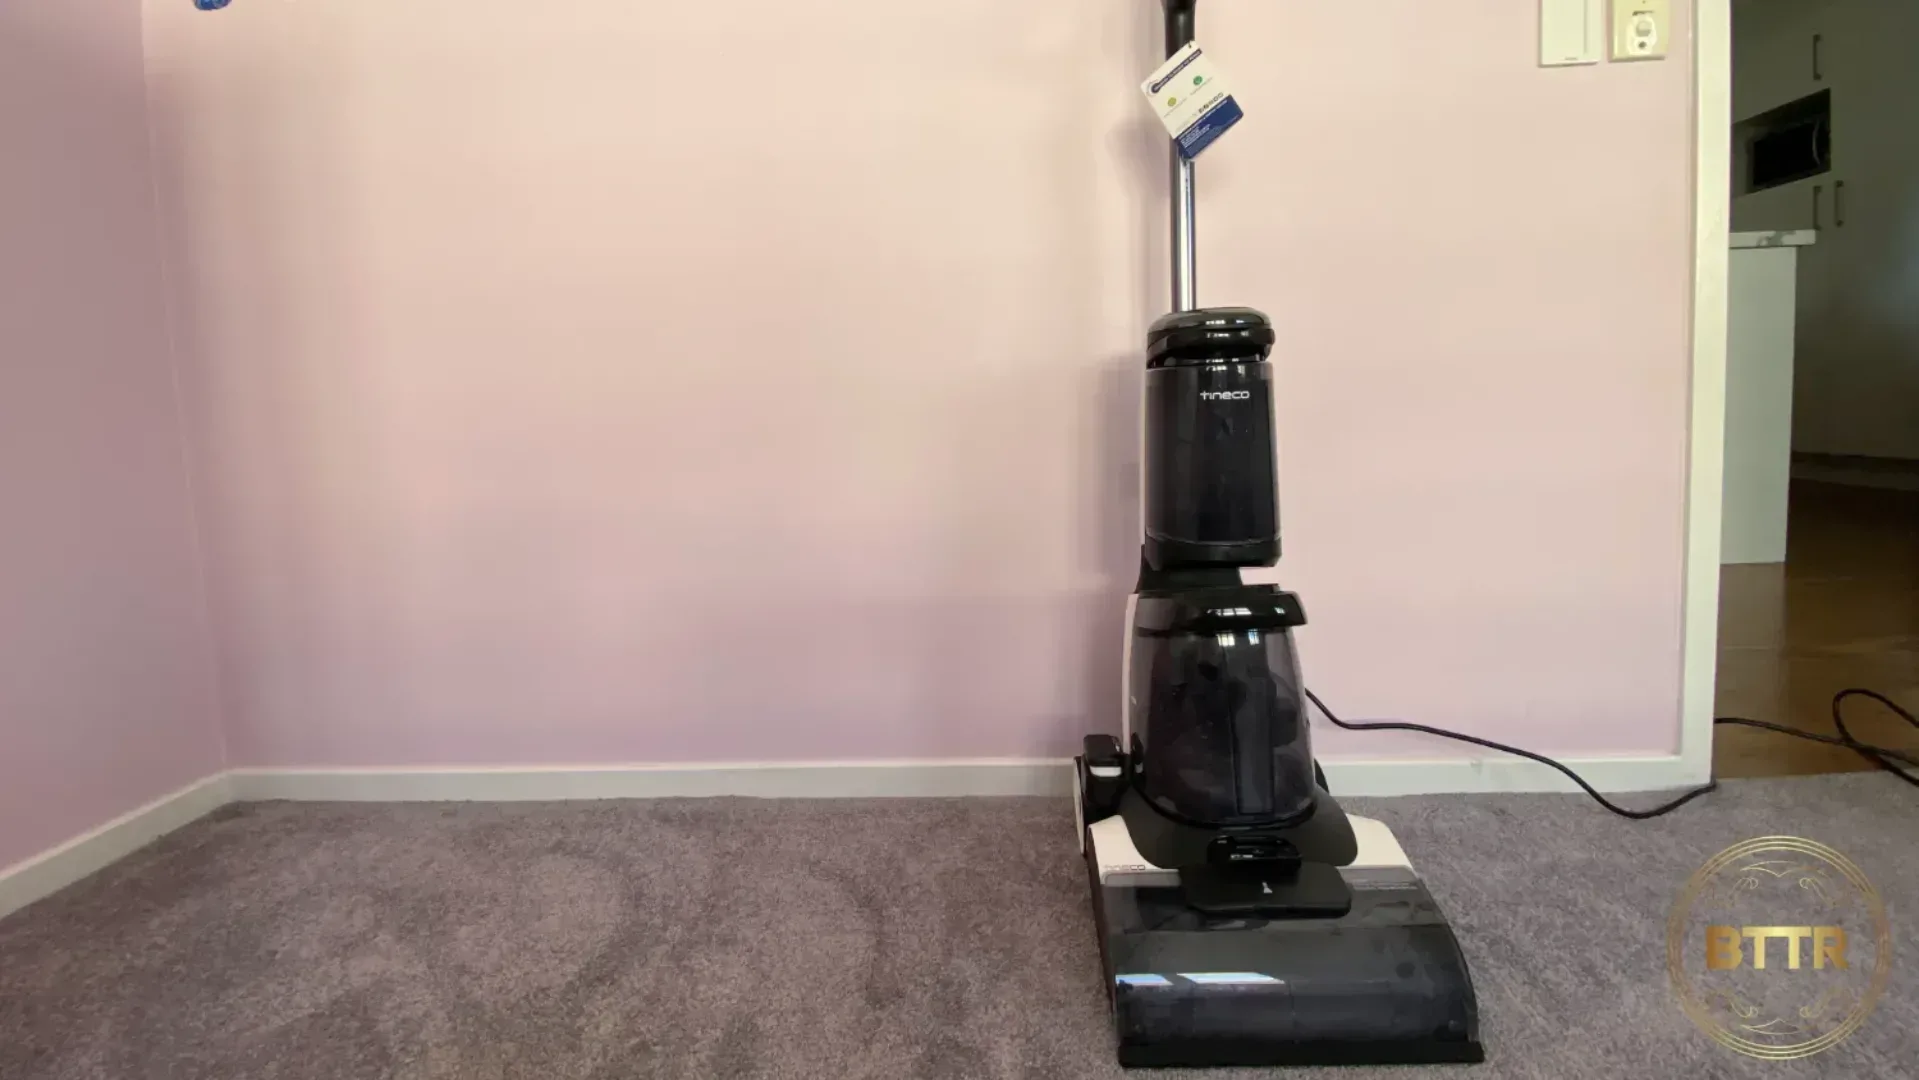 The Tineco Carpet One Pro ready to clean some carpet for our review